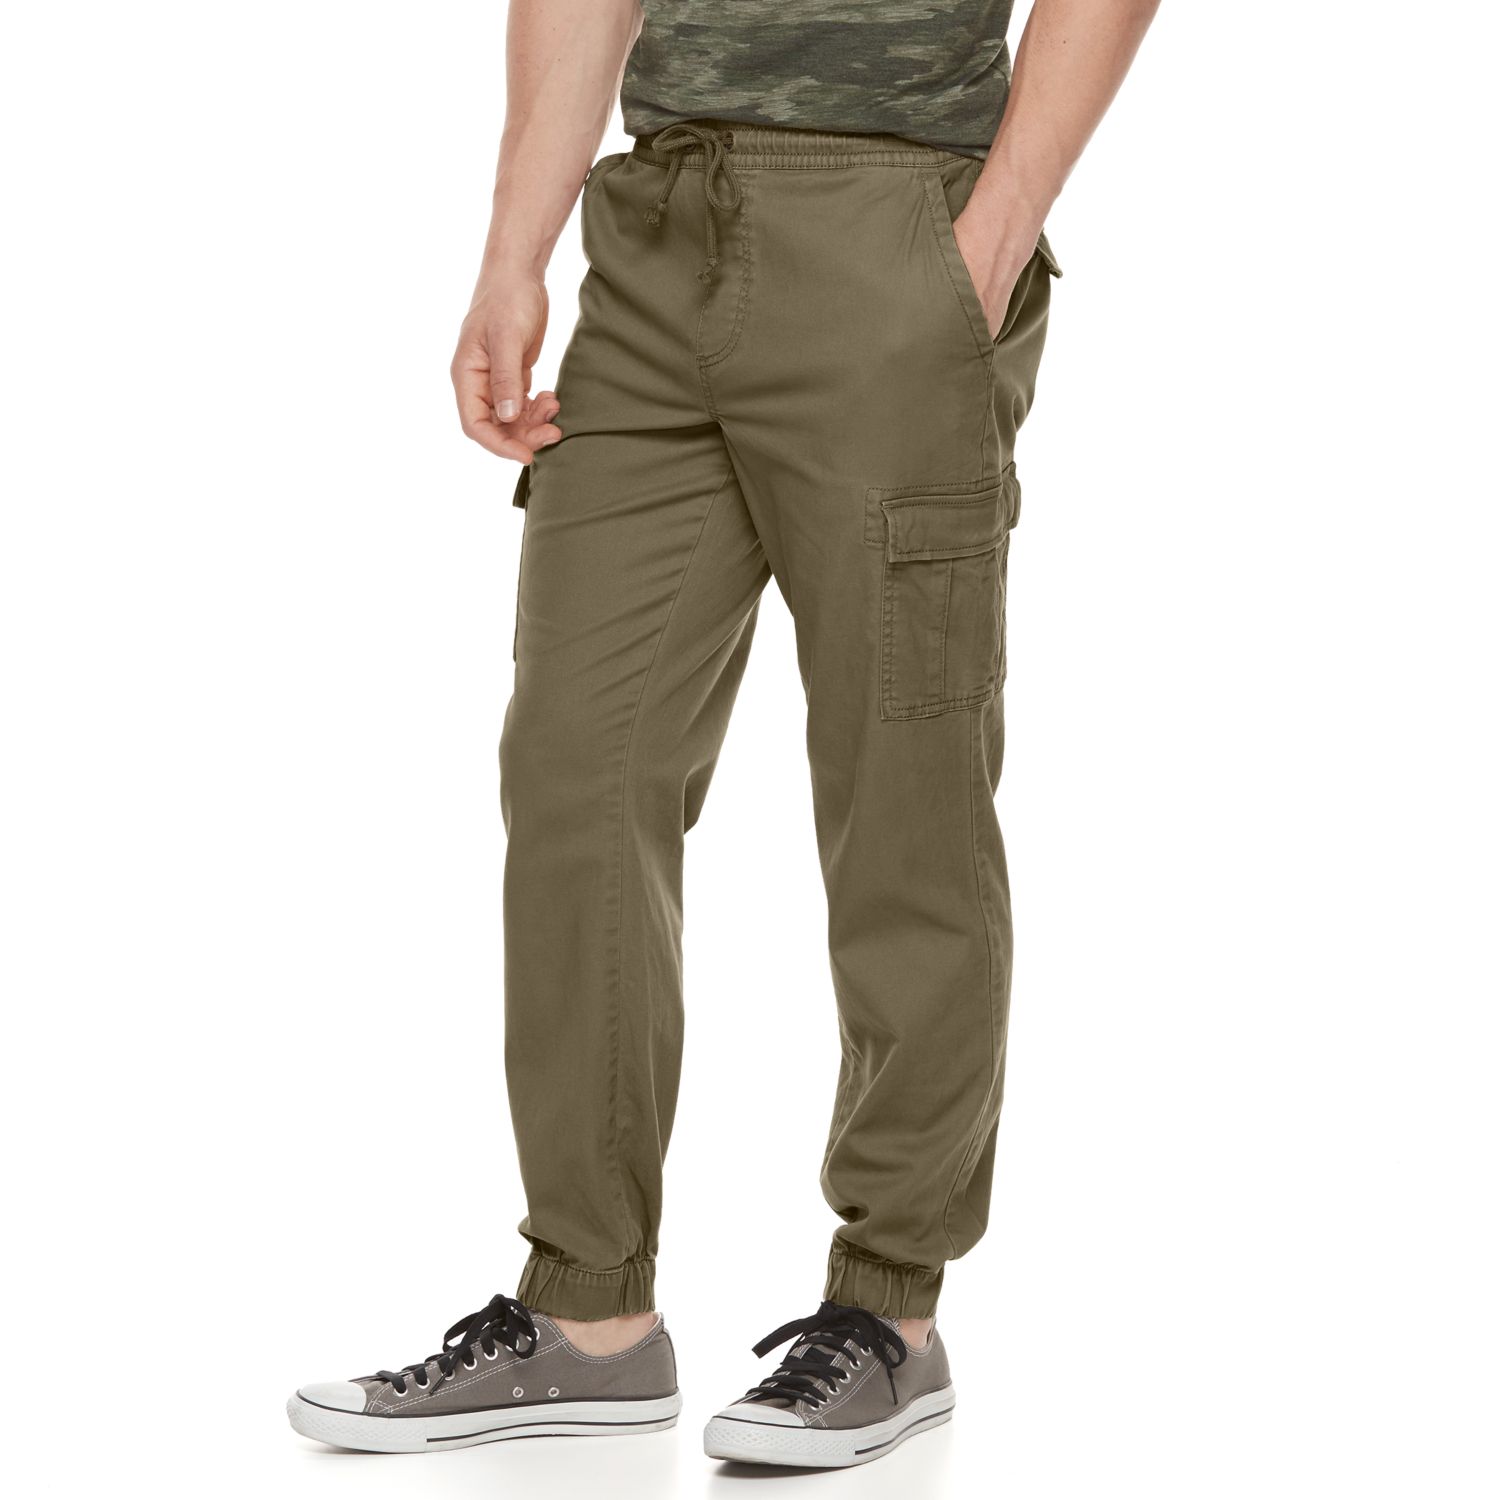 Urban Pipeline Waistband Relaxed Fit Men's Pants